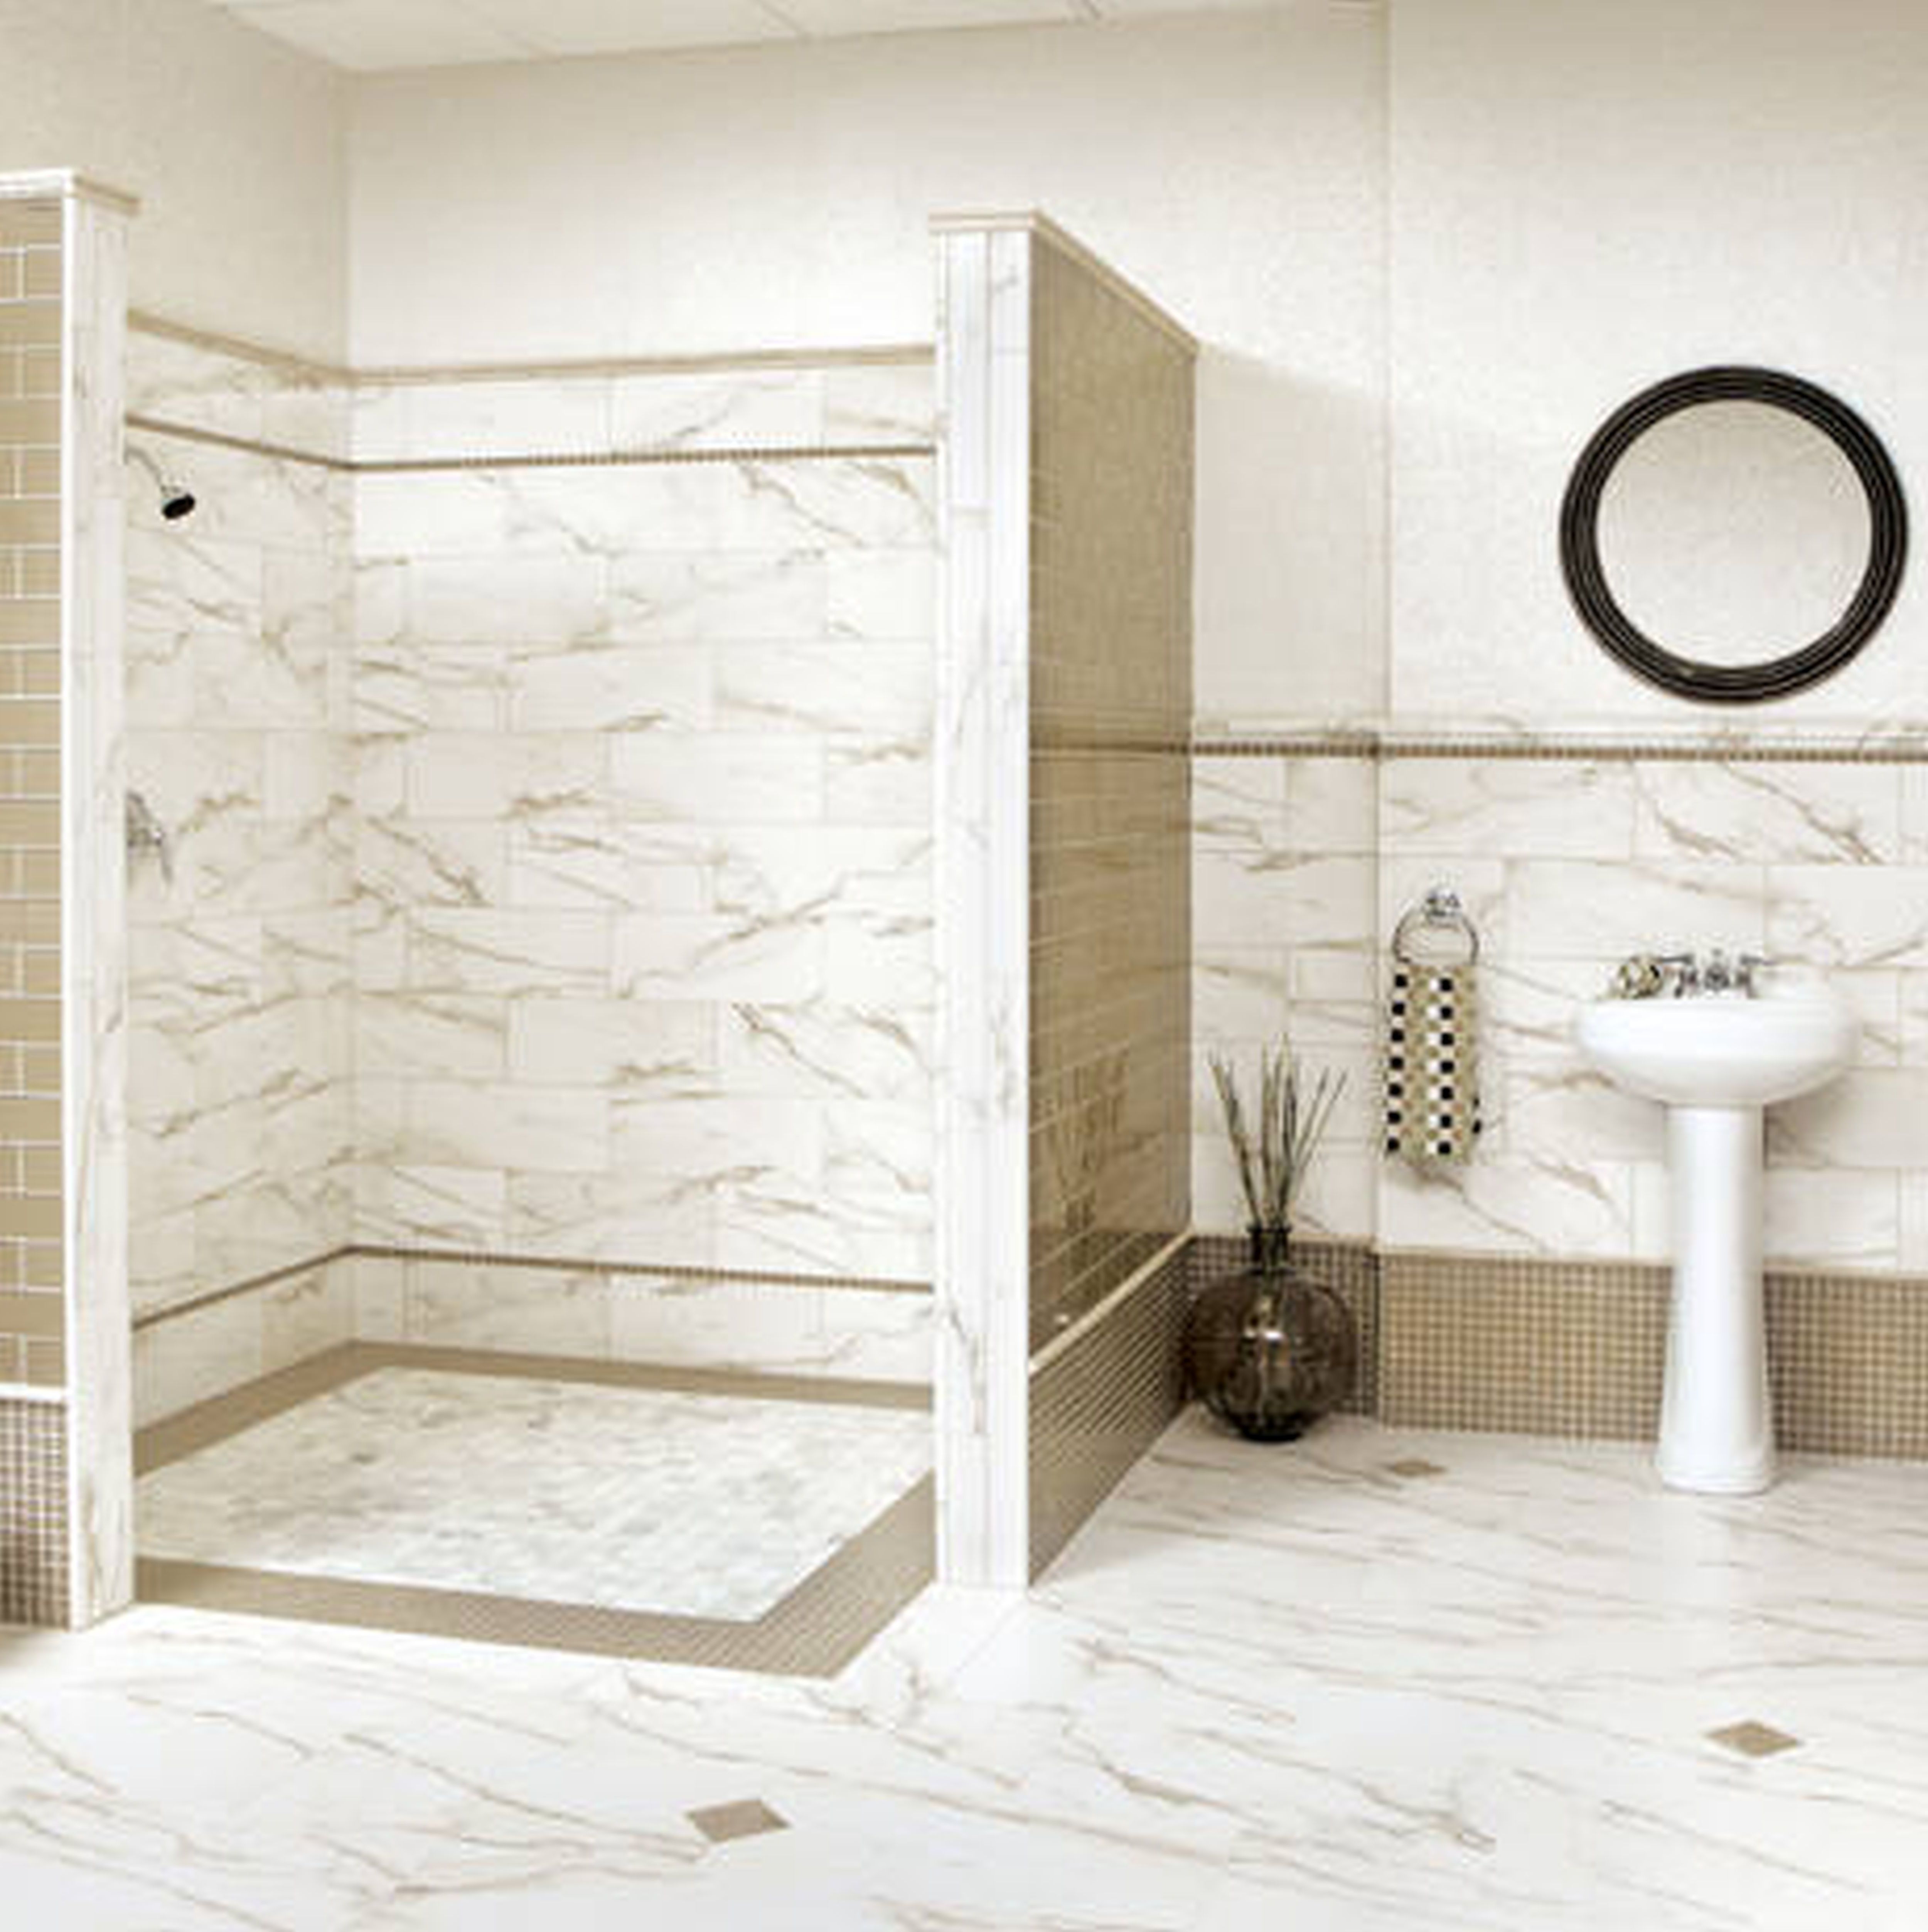 interior-white-marble-bathroom-tile-wall-connected-by-white-washstand-and-round-black-wooden-mirror-on-the-wall-interesting-bathroom-tile-designs-for-small-bathrooms-brings-pleasing-nuance